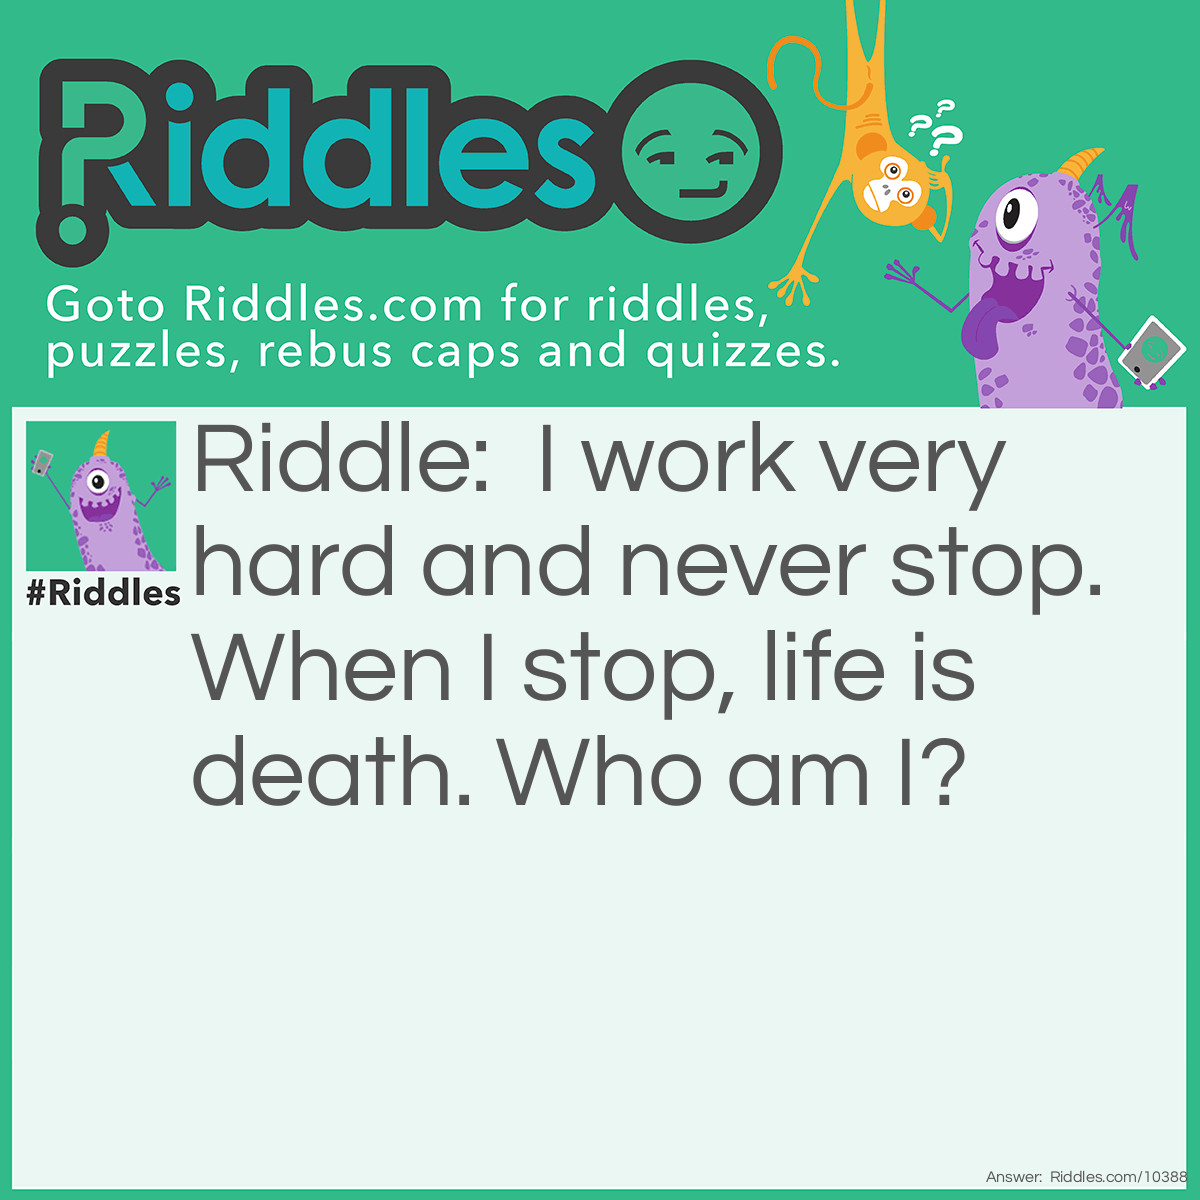 Riddle: I work very hard and never stop. When I stop, life is death. Who am I? Answer: Your Heart. It has to work hard to pump blood to all parts of your body!